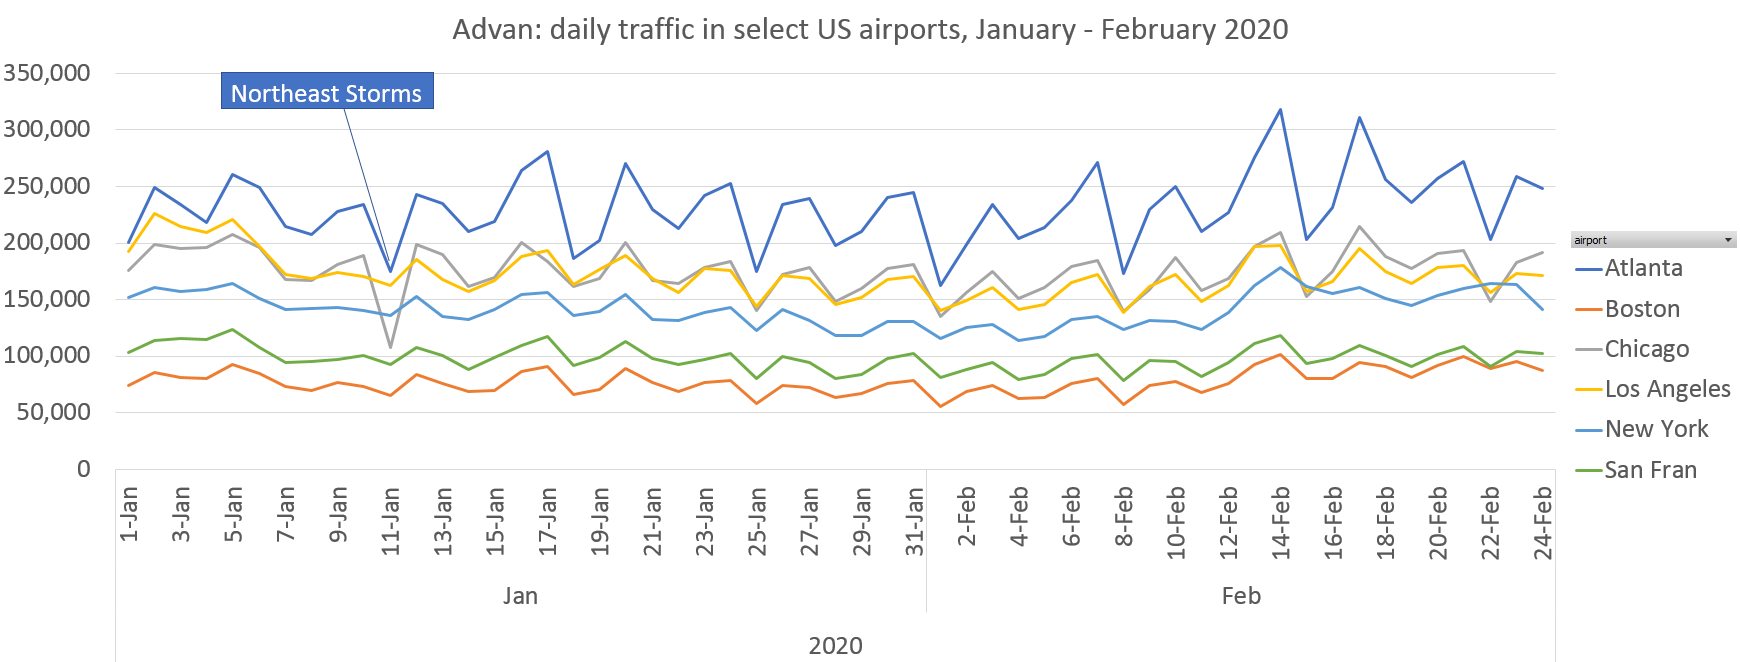 Advan: daily traffic in select US airports, January - February 2020